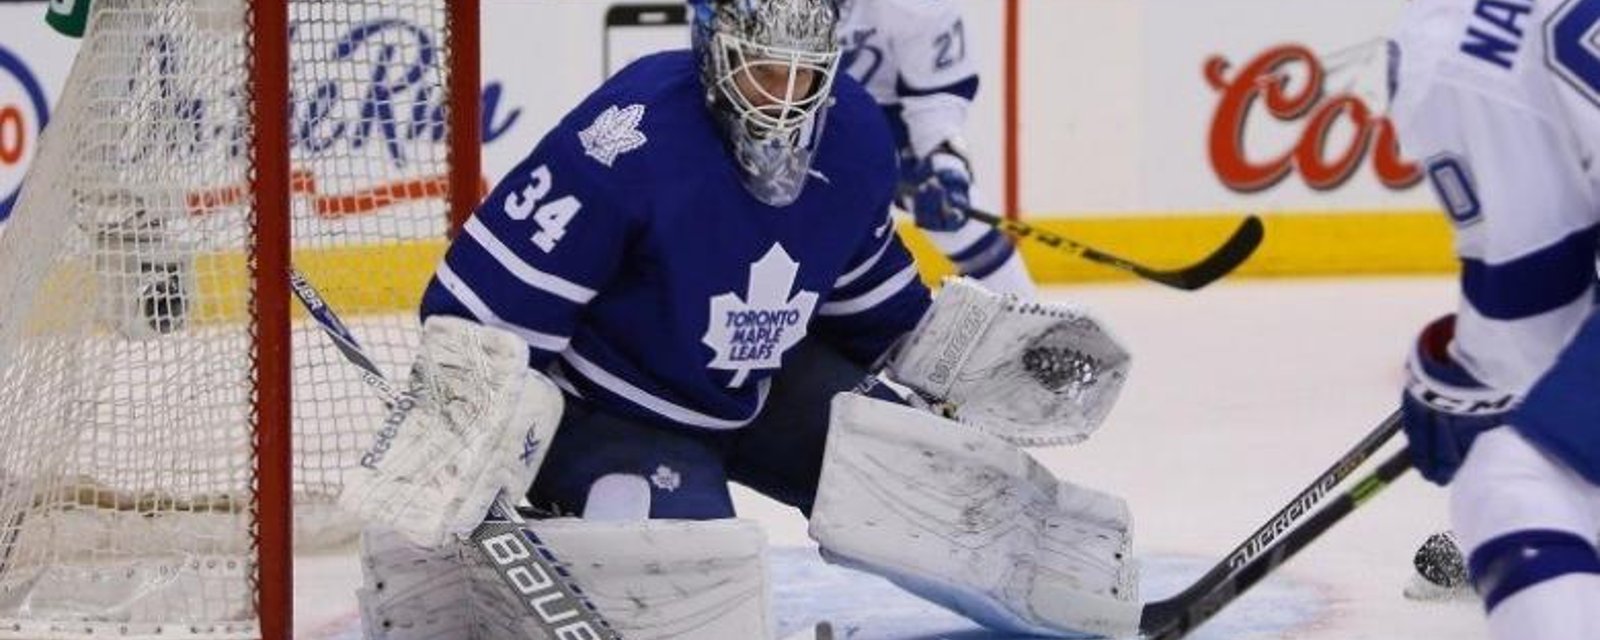 Maple Leafs At The Trade Deadline: The Goalies